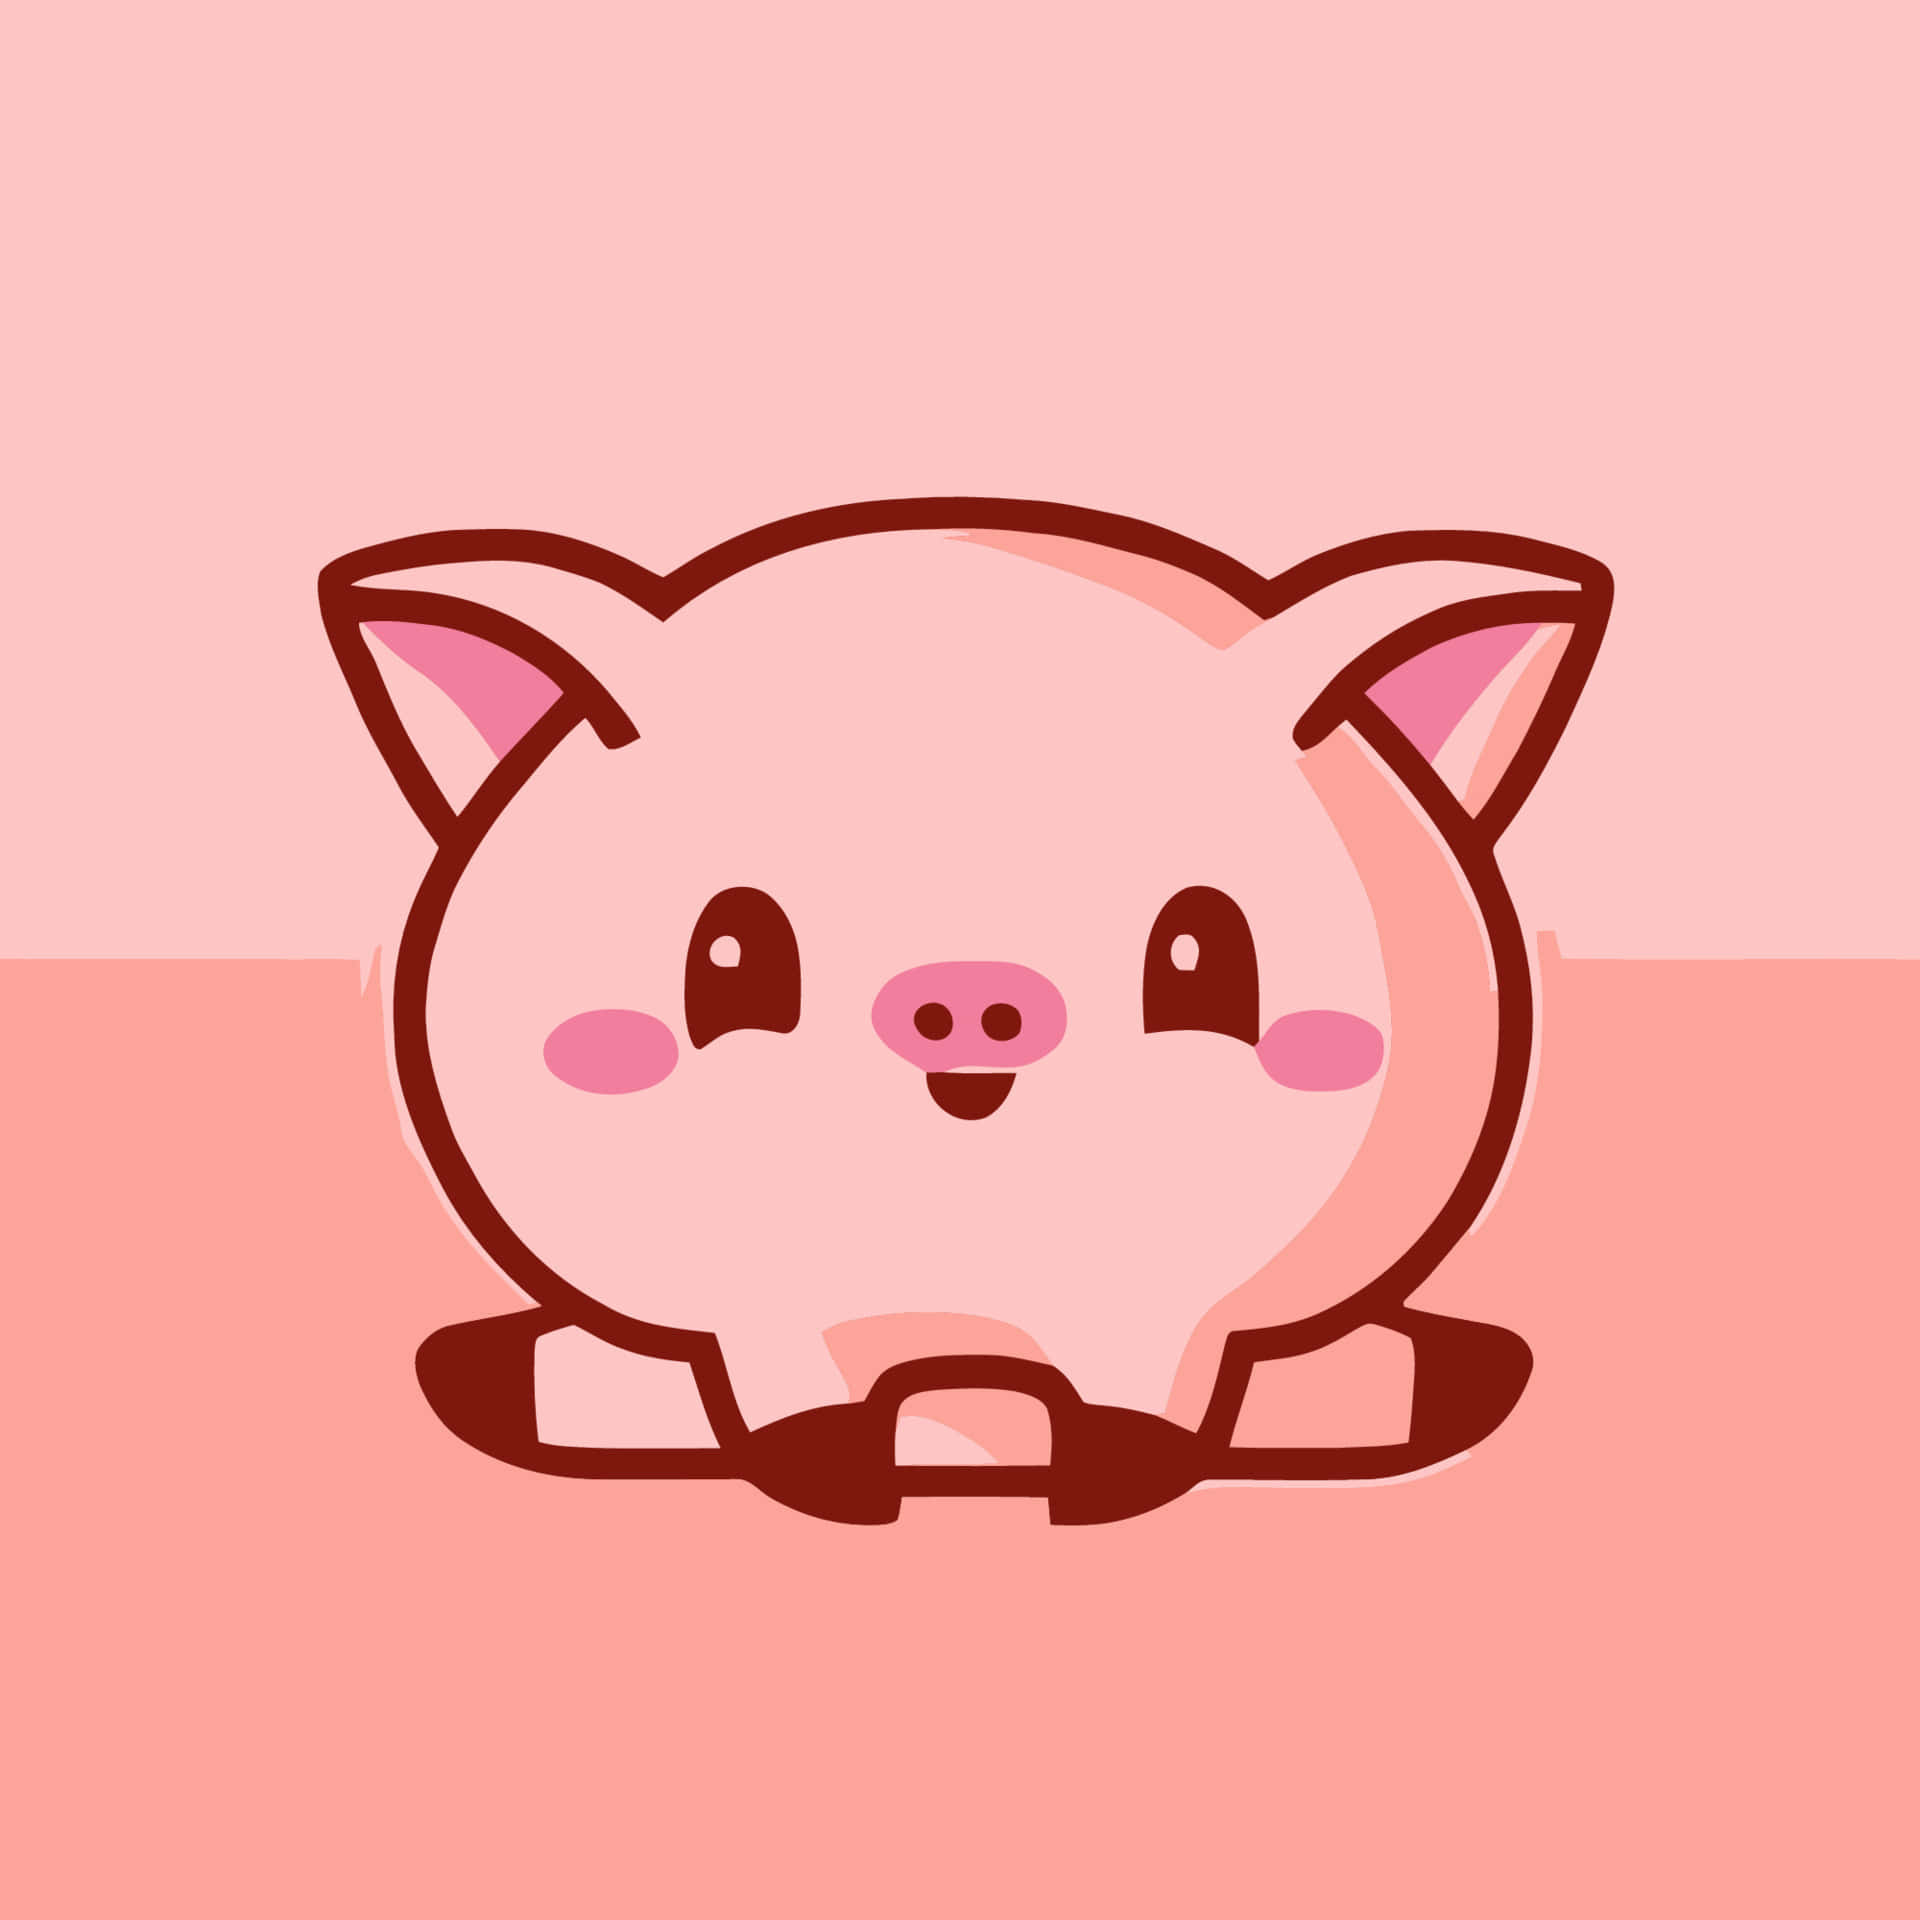 This cute pig is so full of love